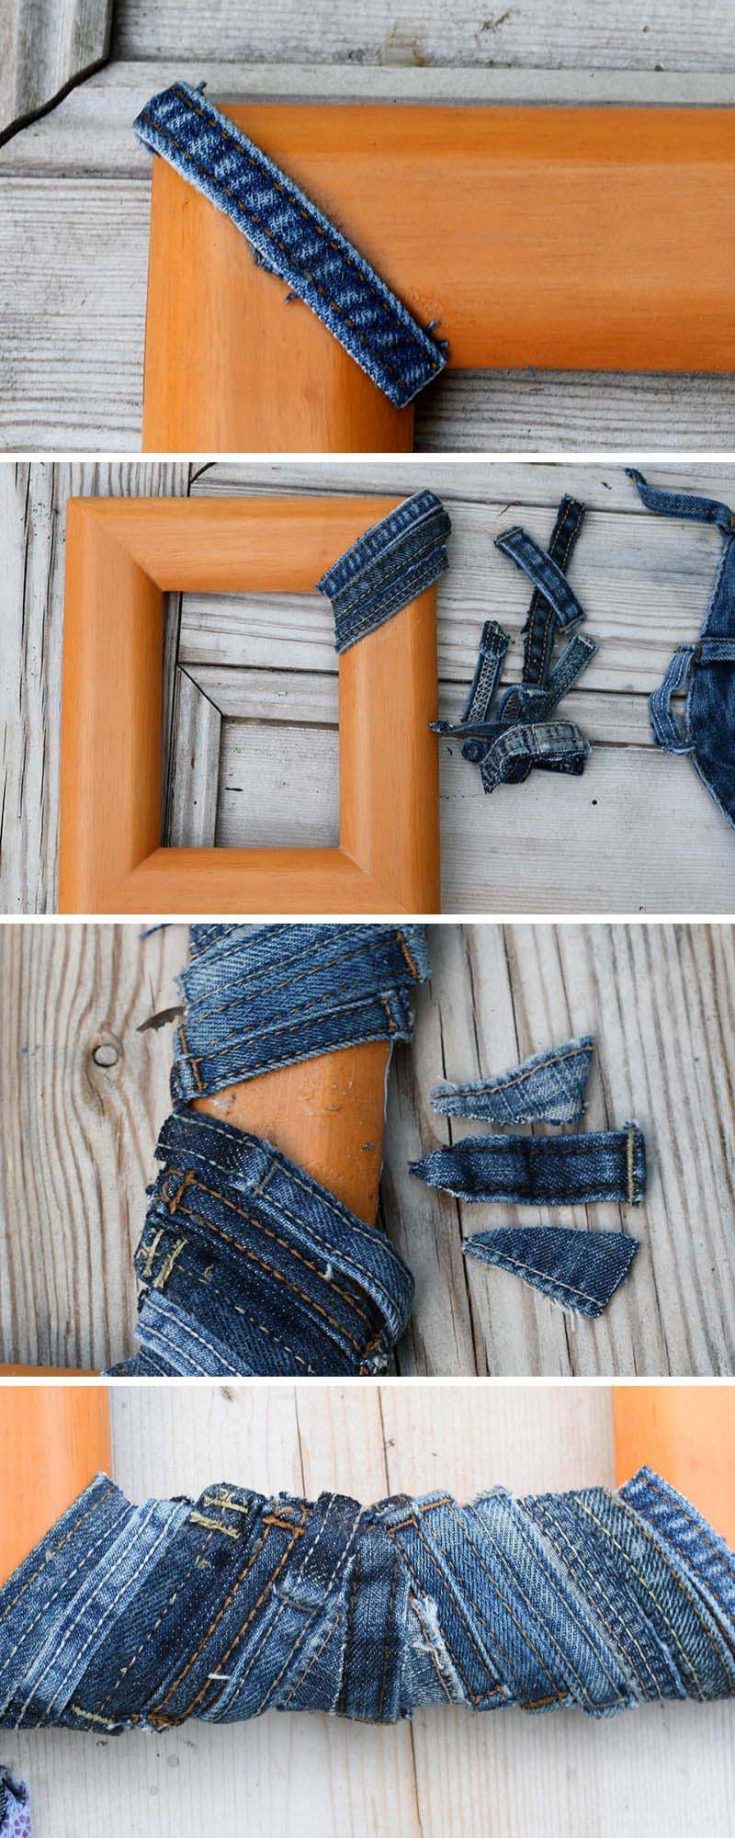 How To Make A Denim Photo Frame Out Of Old Jeans - Pillar Box Blue